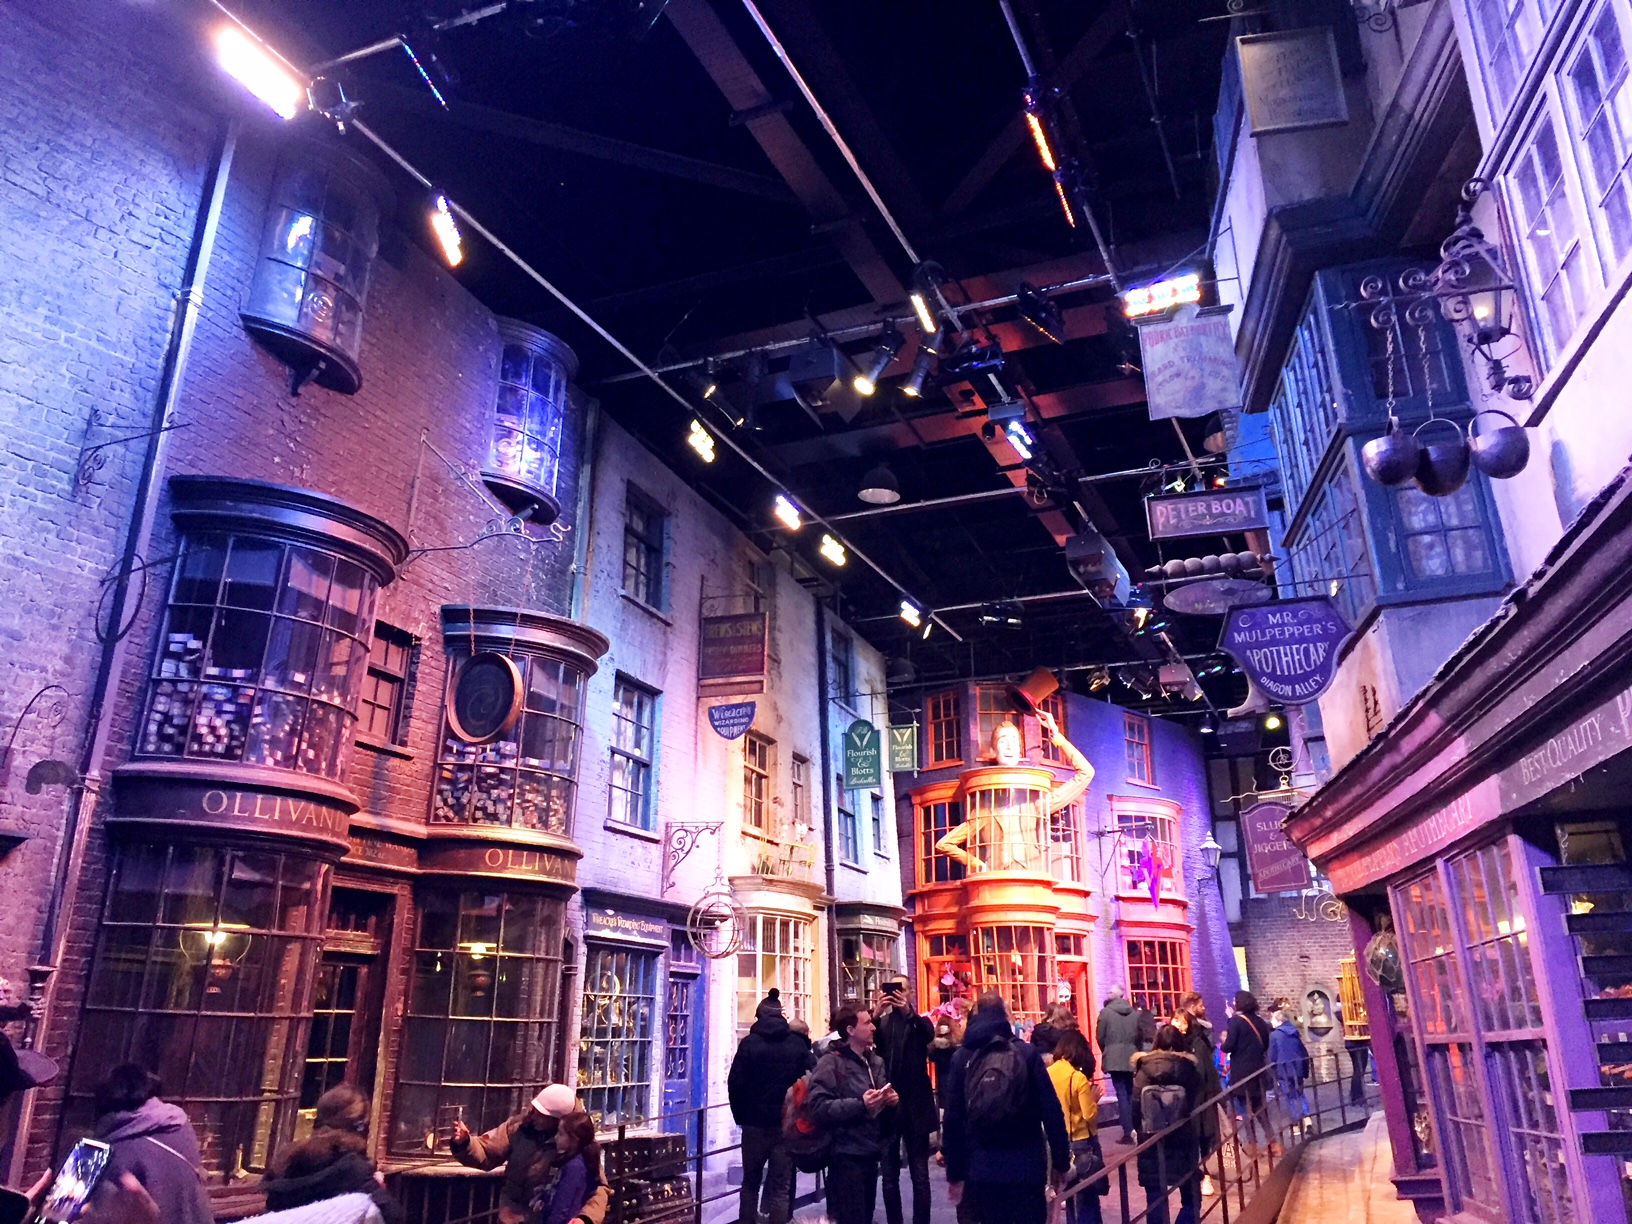 Diagon Alley set at the Harry Potter Studio tour in London